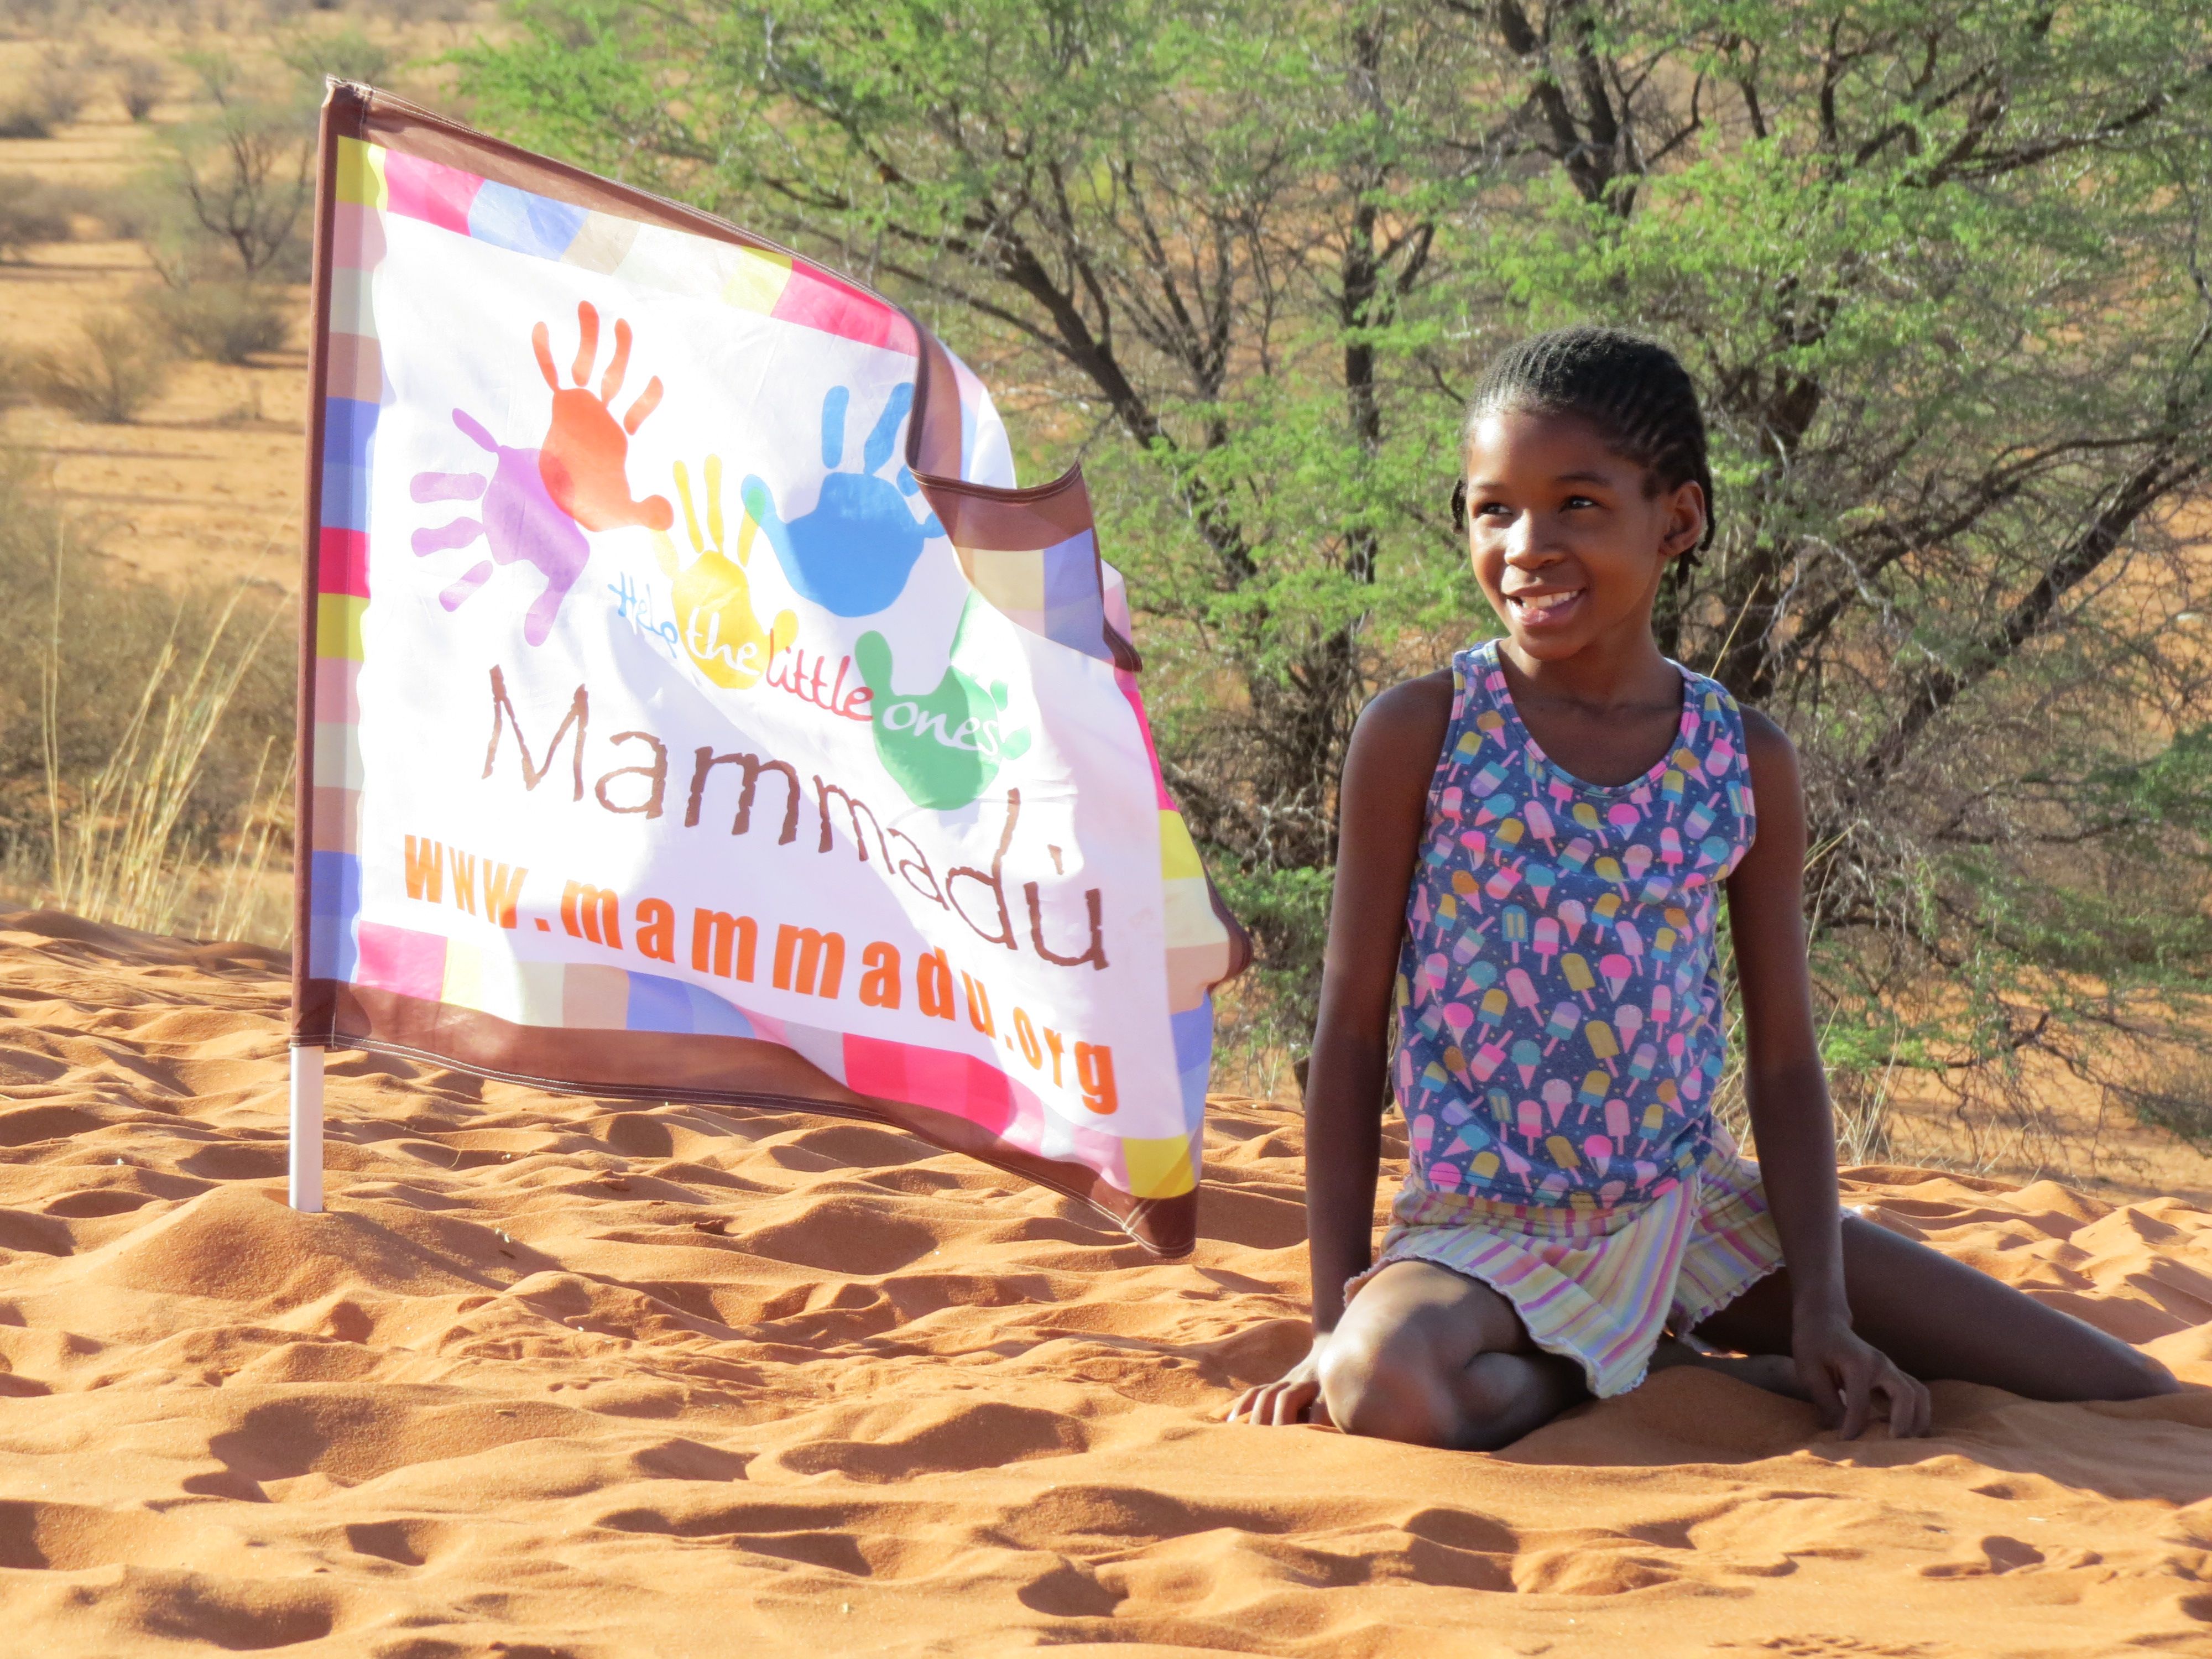 10 years tour operator For Family Reisen - child aid project Mammadu in Namibia